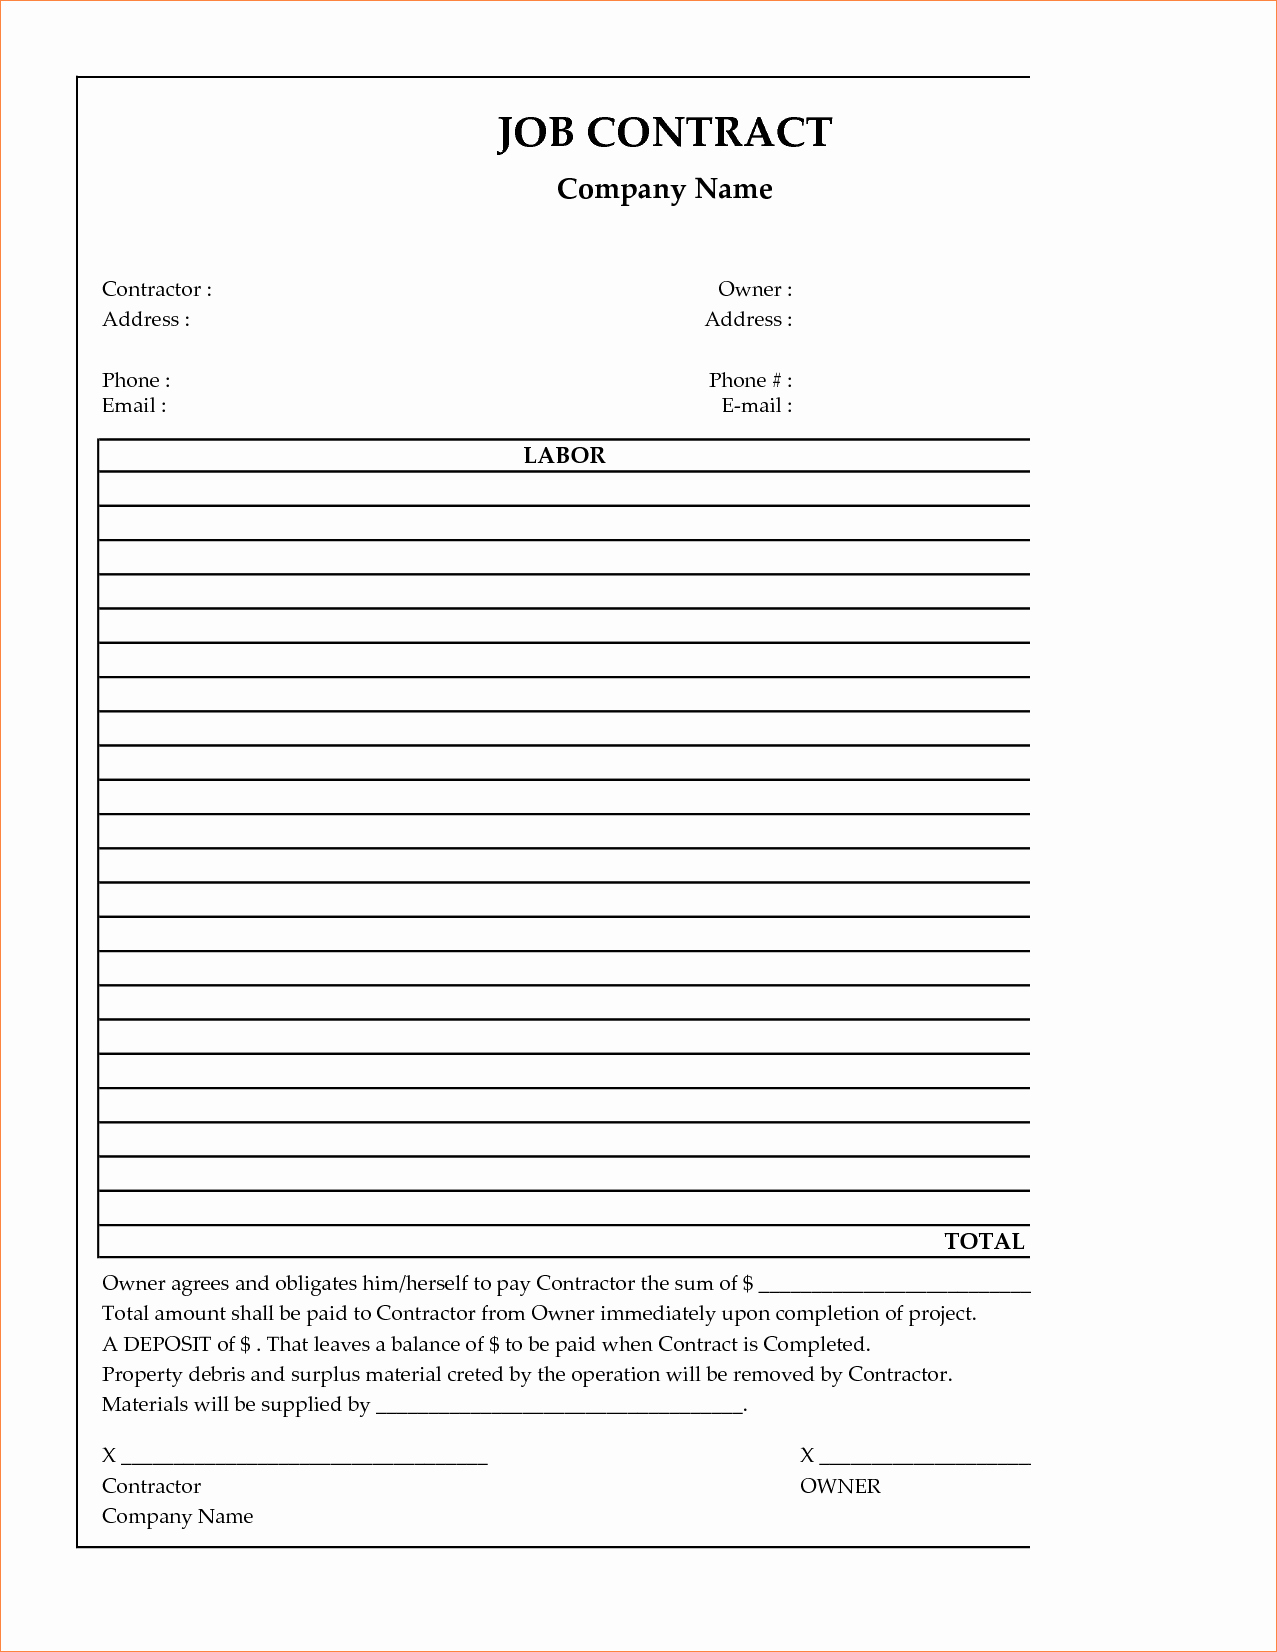 Free Roofing Contract Template Fresh 7 Free Construction Contract Templatereport Template